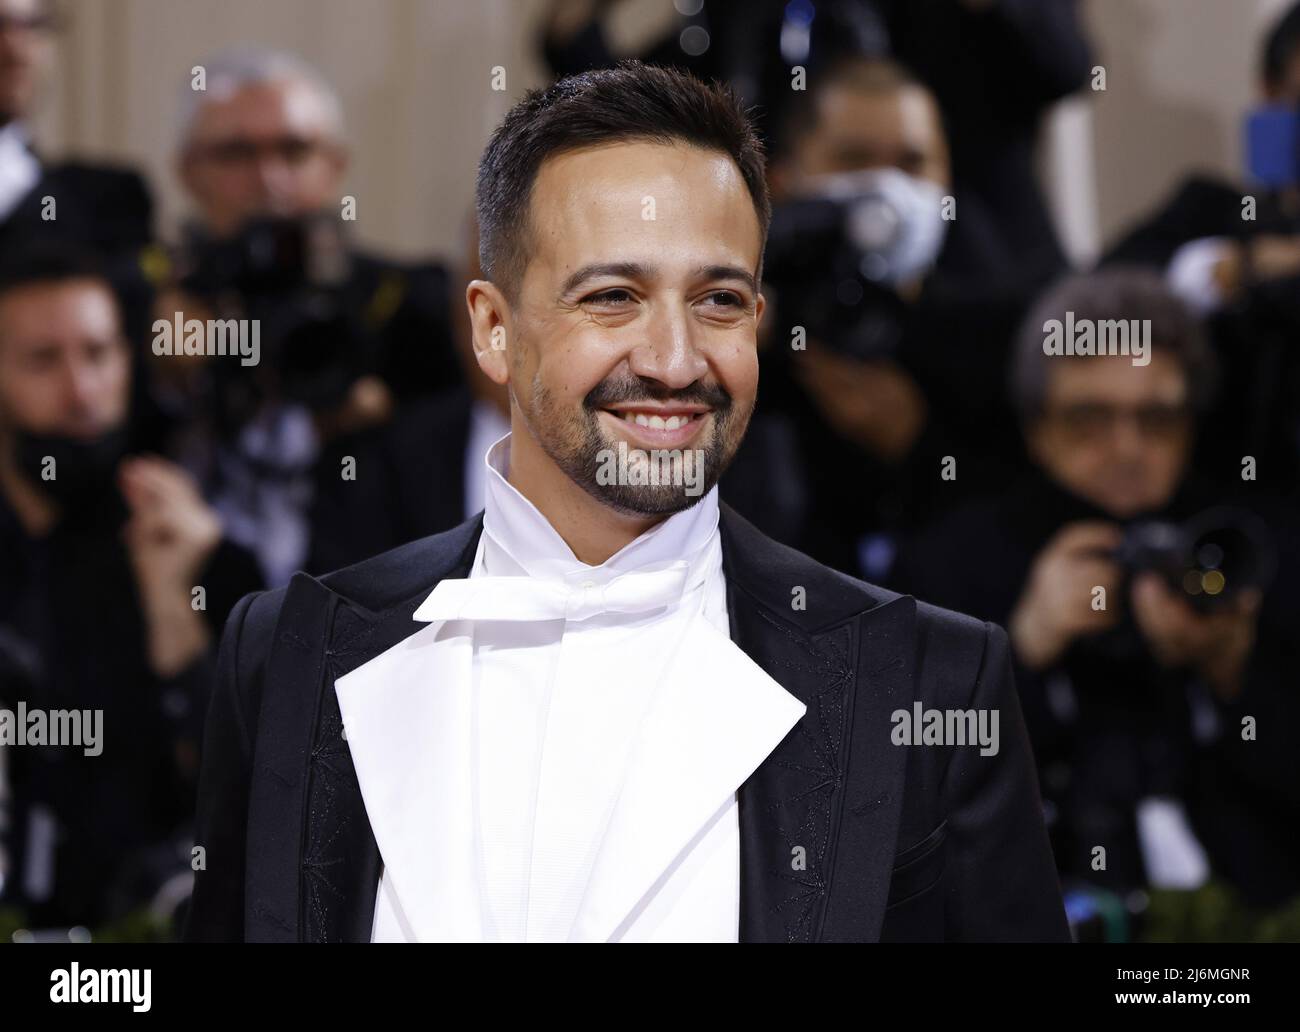 New York, United States. 03rd May, 2022. Lin-Manuel Miranda arrives on the red carpet for The Met Gala at The Metropolitan Museum of Art celebrating the Costume Institute opening of 'In America: An Anthology of Fashion' in New York City on Monday, May 2, 2022. Photo by John Angelillo/UPI Credit: UPI/Alamy Live News Stock Photo